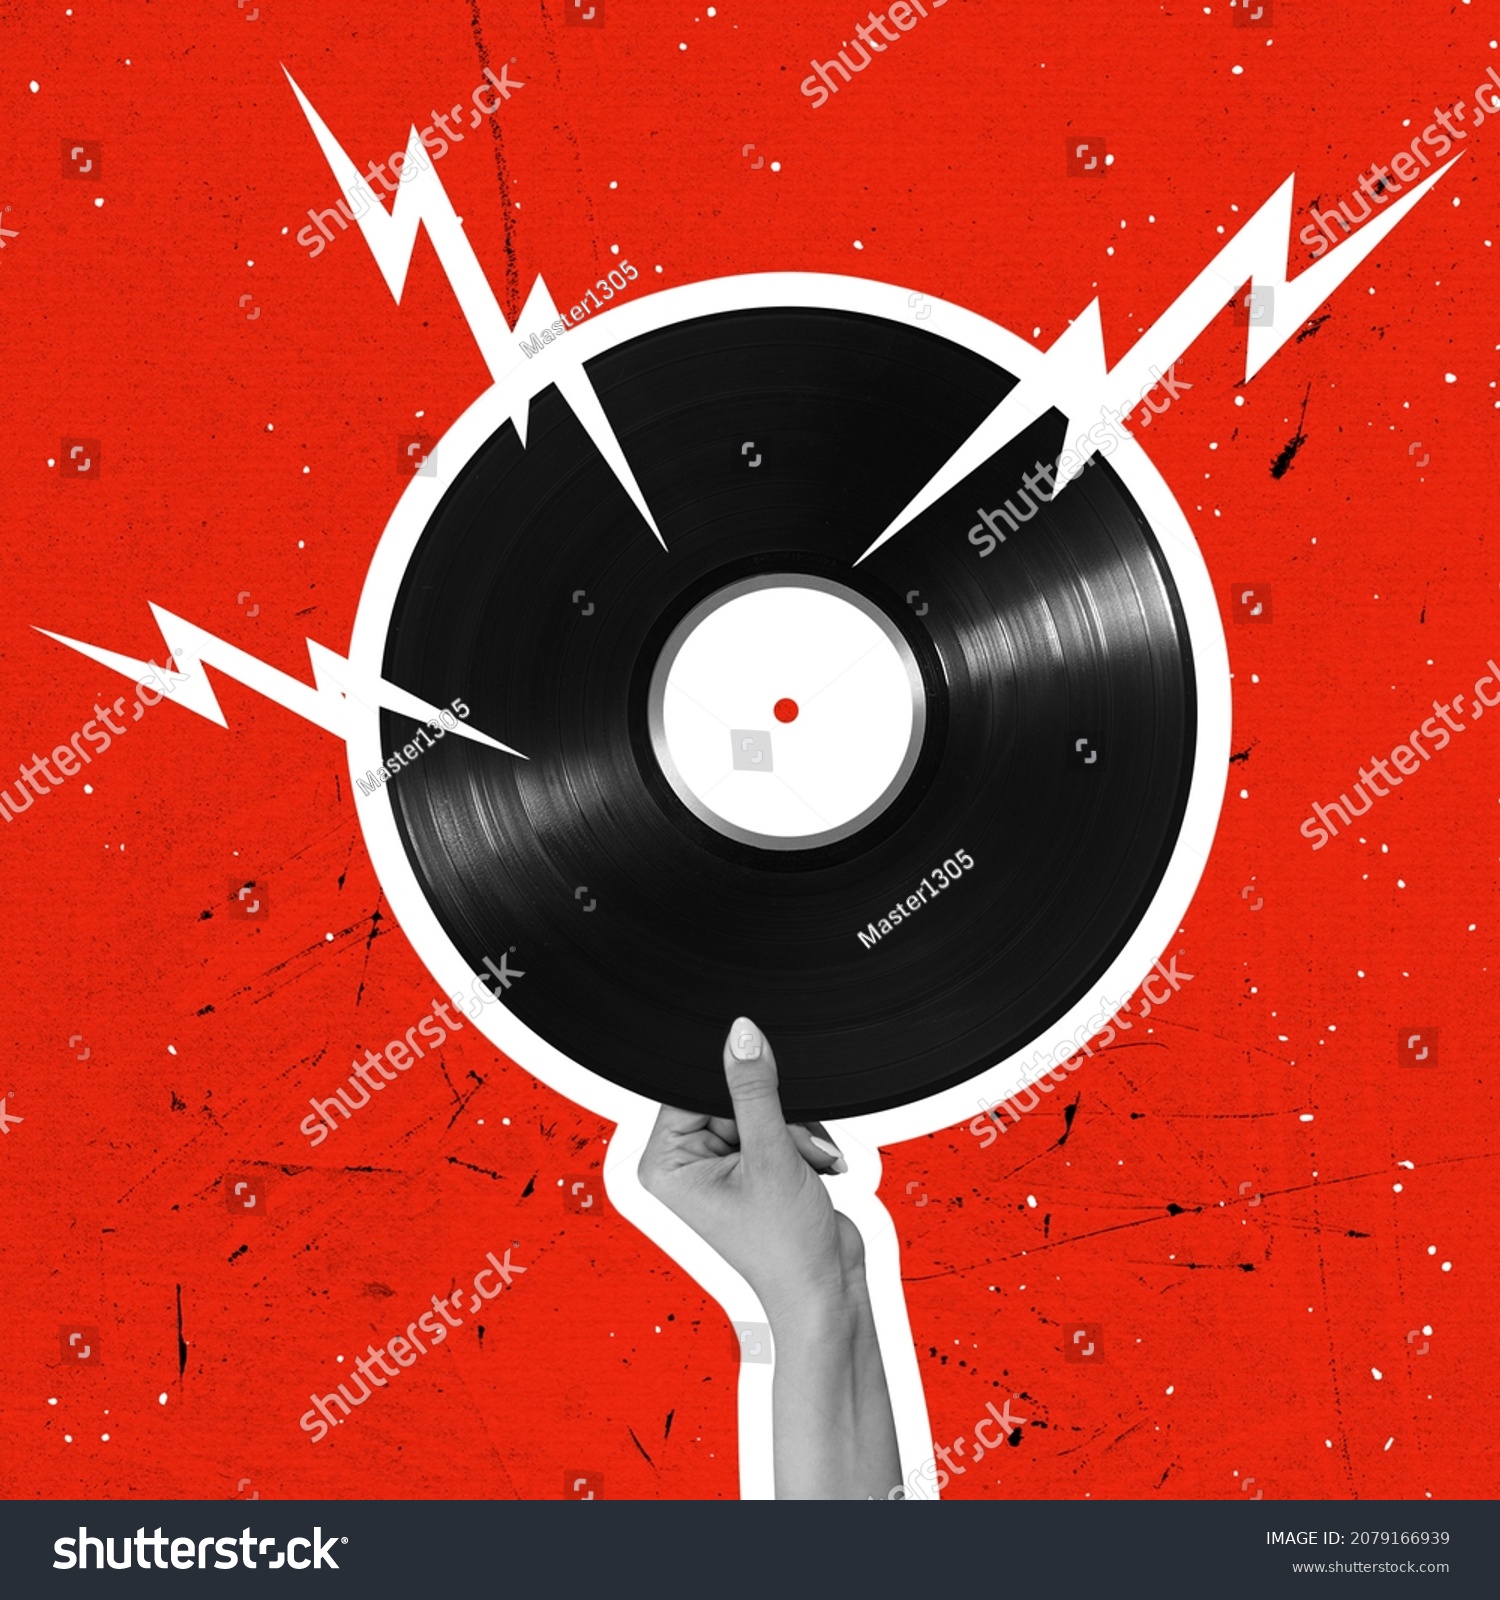 Timelsess music. Composition with retro vinyl record isolated on bright background. Conceptual, contemporary art collage. Retro styled, surrealism, fashionable. Idea, aspiration, comparison of eras #2079166939